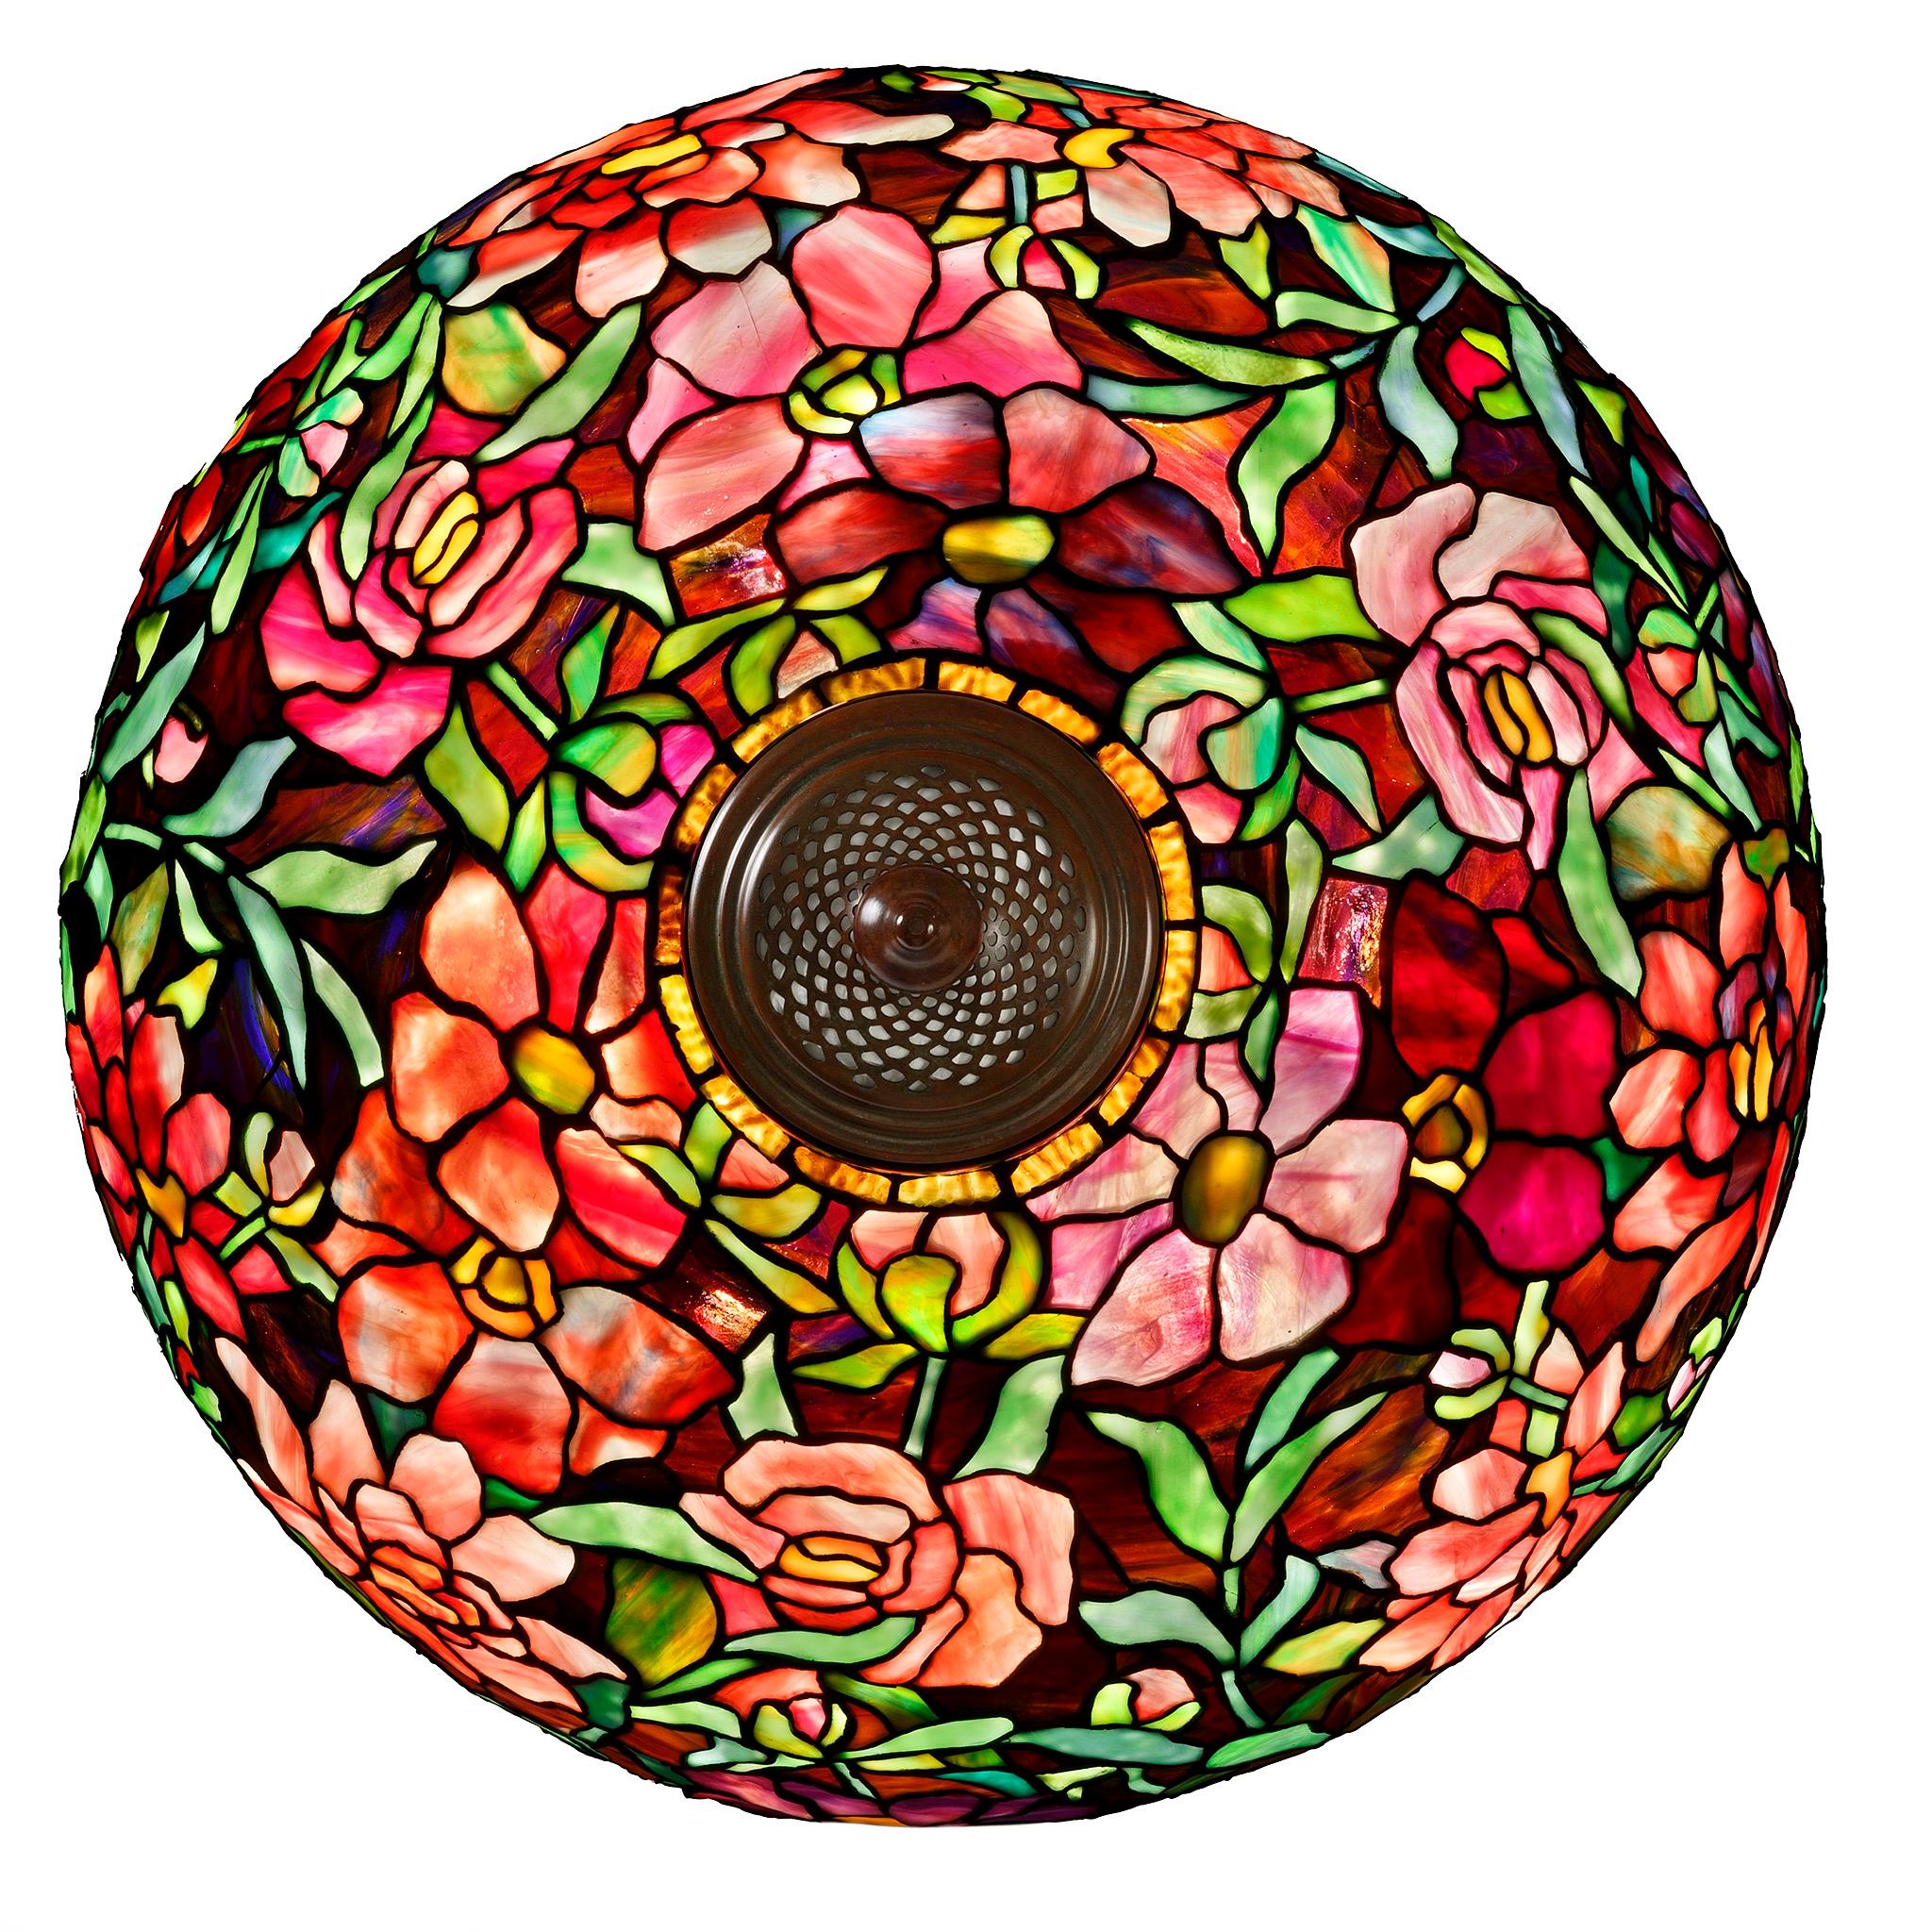 Tiffany’s “Peony” table lamp was a work grounded in naturalism but reaching for the divine. With a shade of resplendent blooms and a mosaic base evoking the hallowed ground of church floors, Tiffany’s peony lamp demonstrates his foundation in both